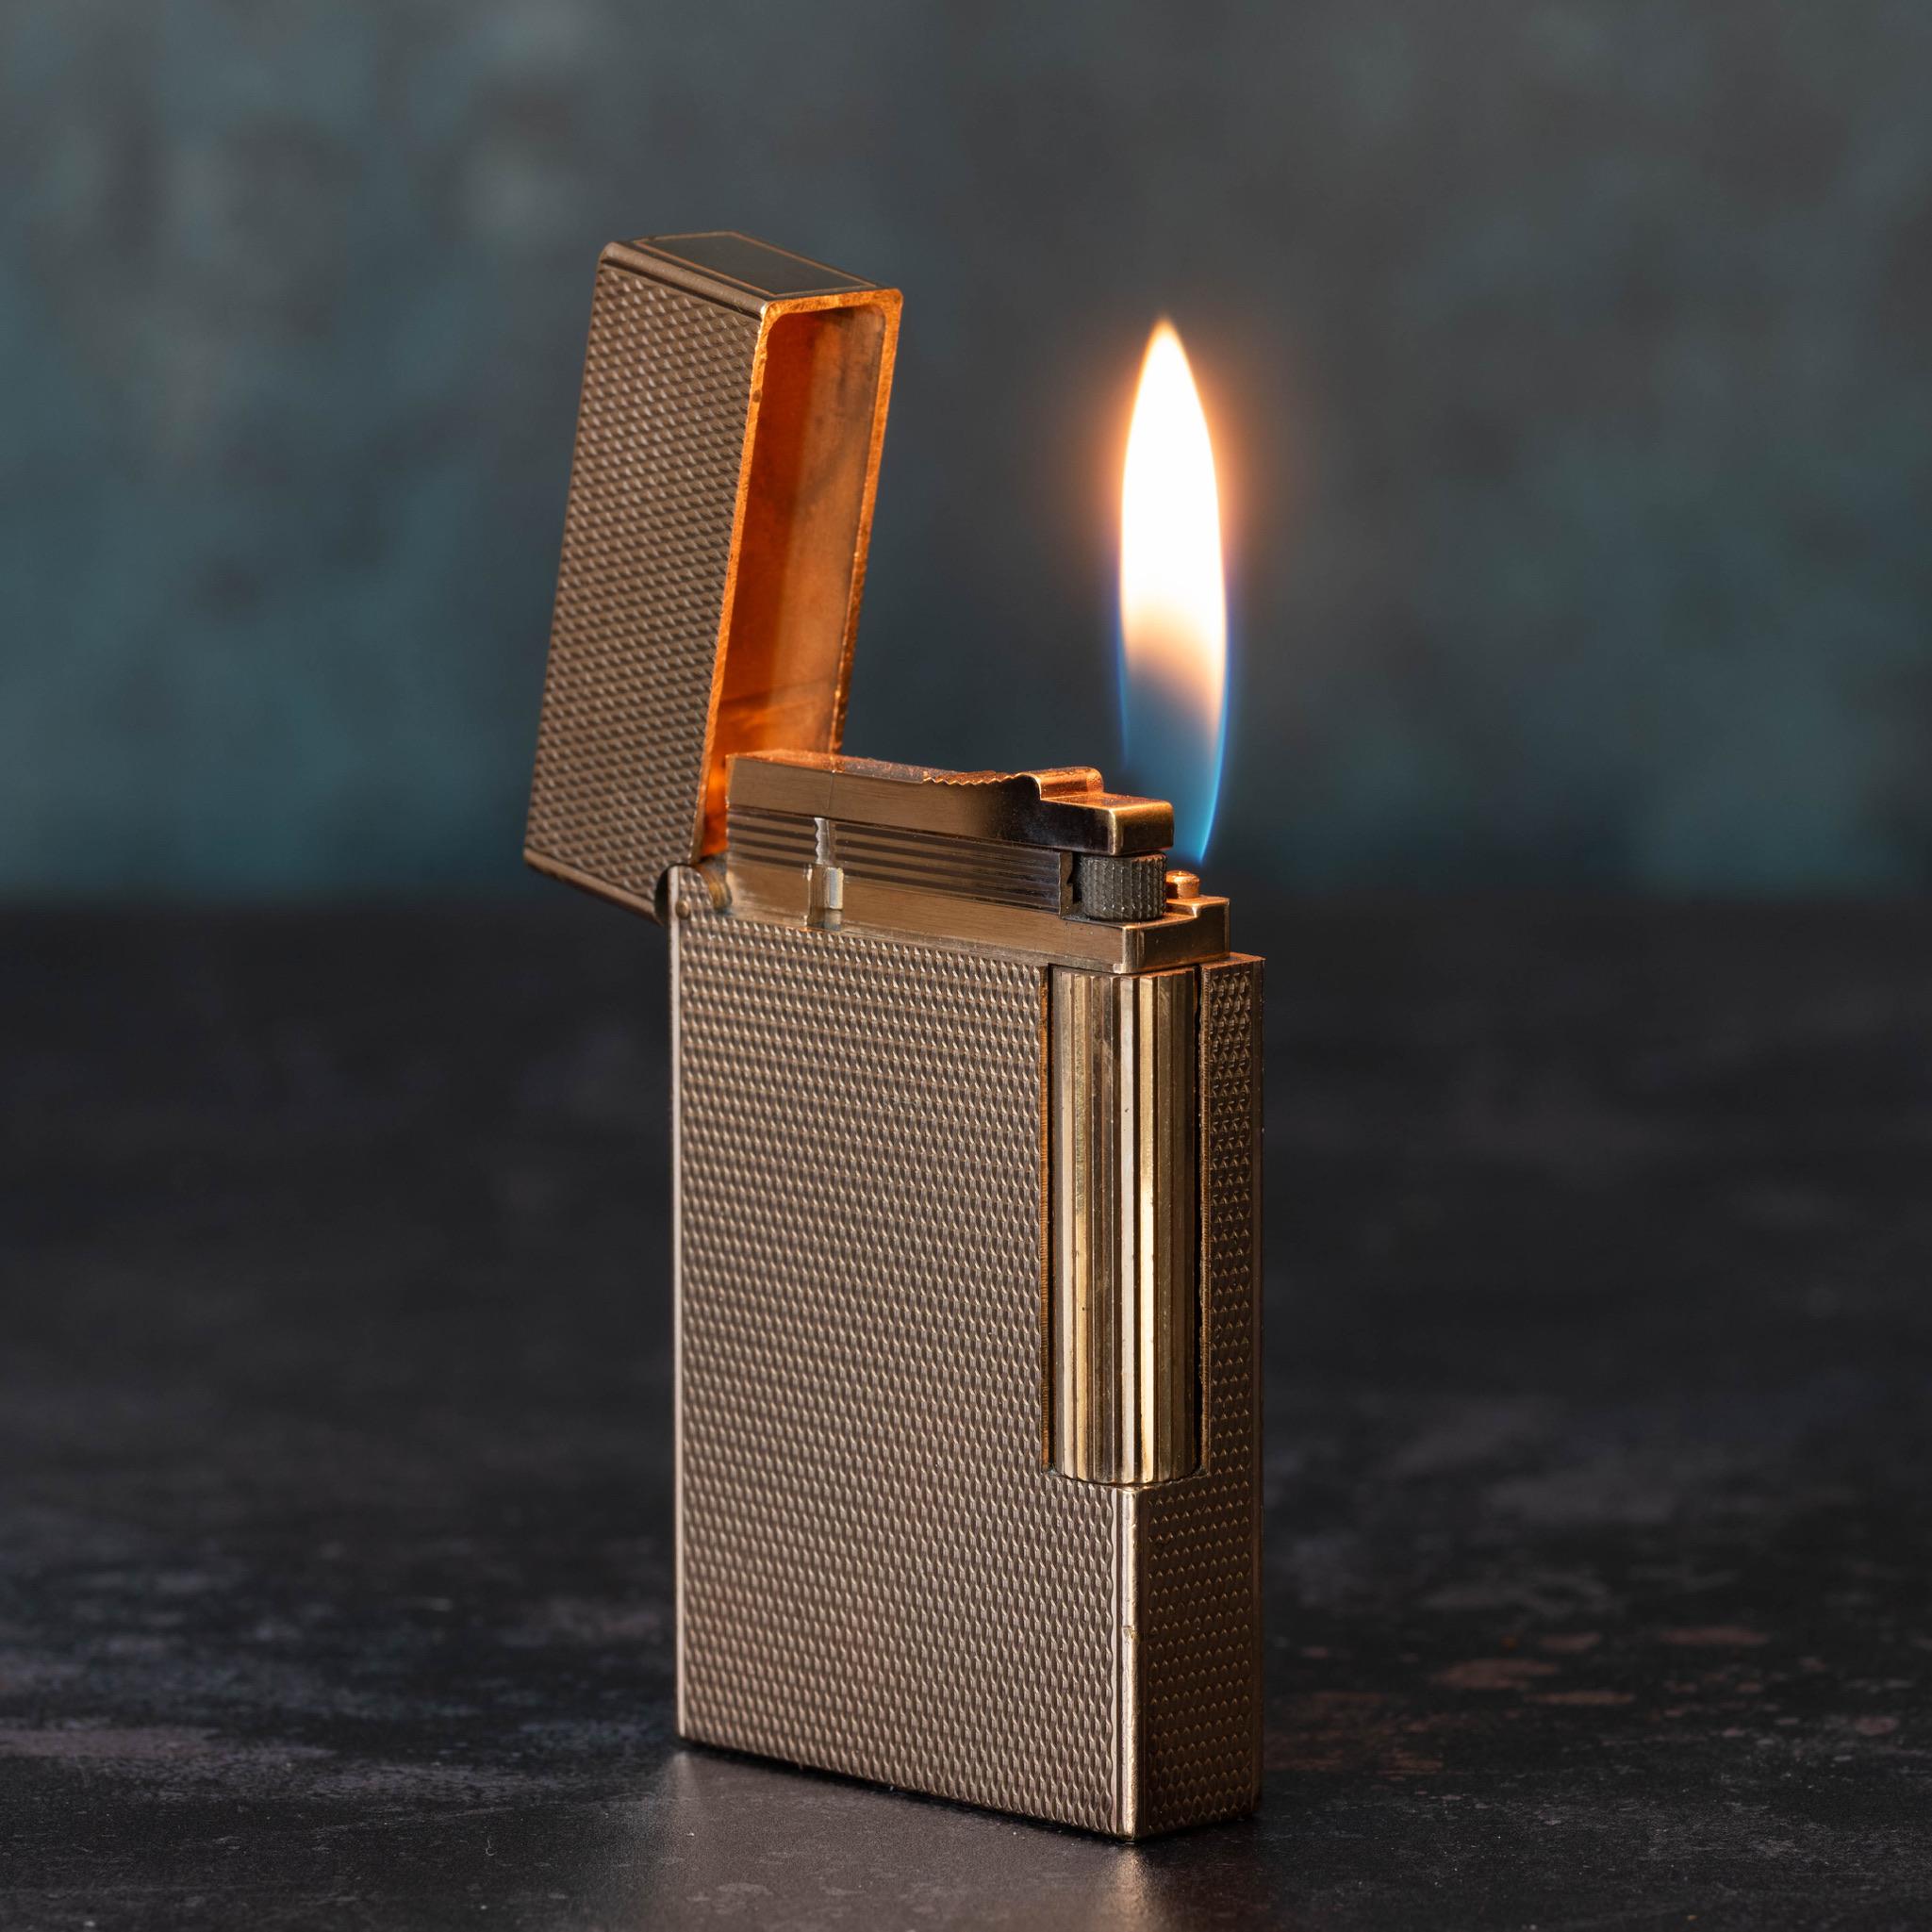 Stylish Dupont Ligne 2 gas lighter in rose gold plate with engine turned design, circa 1980.

Each Dupont has a serial number unique to that particular lighter. This example is marked on the base, ’S.T Dupont - Paris - Made in France' - with serial